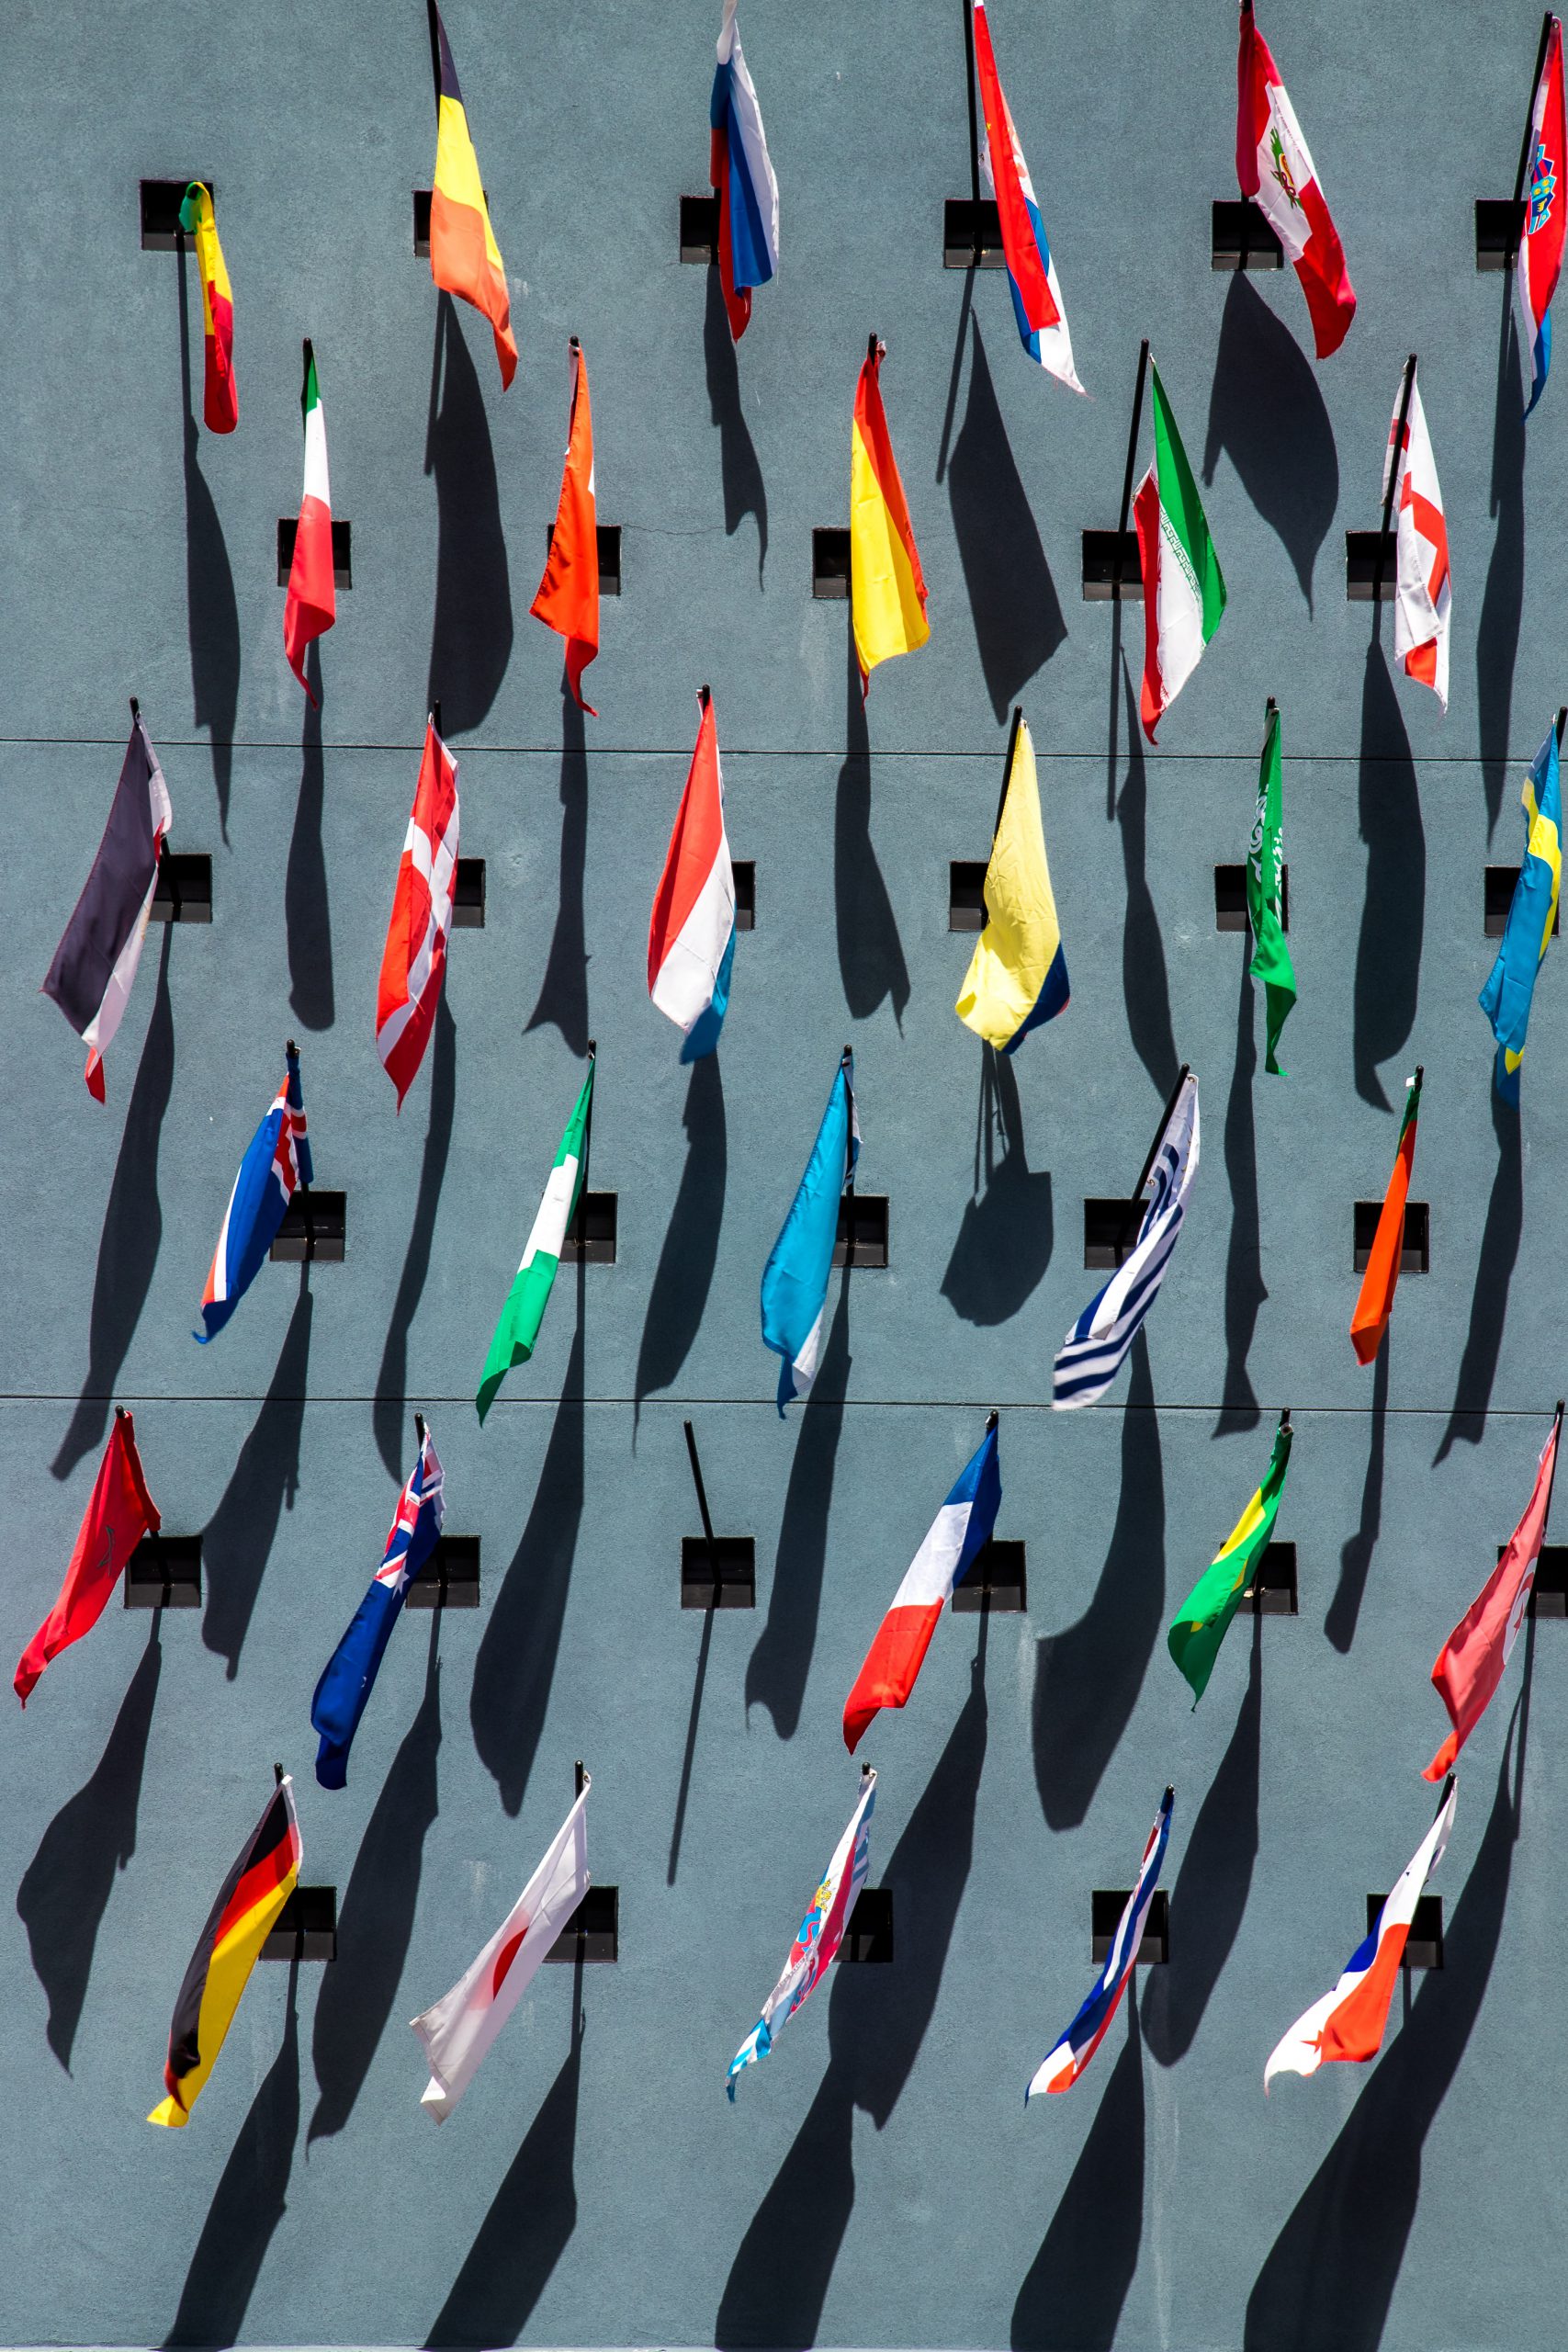 photo-of-assorted-color-nation-flags-on-wall-during-daytime-stockpack-unsplash.jpg